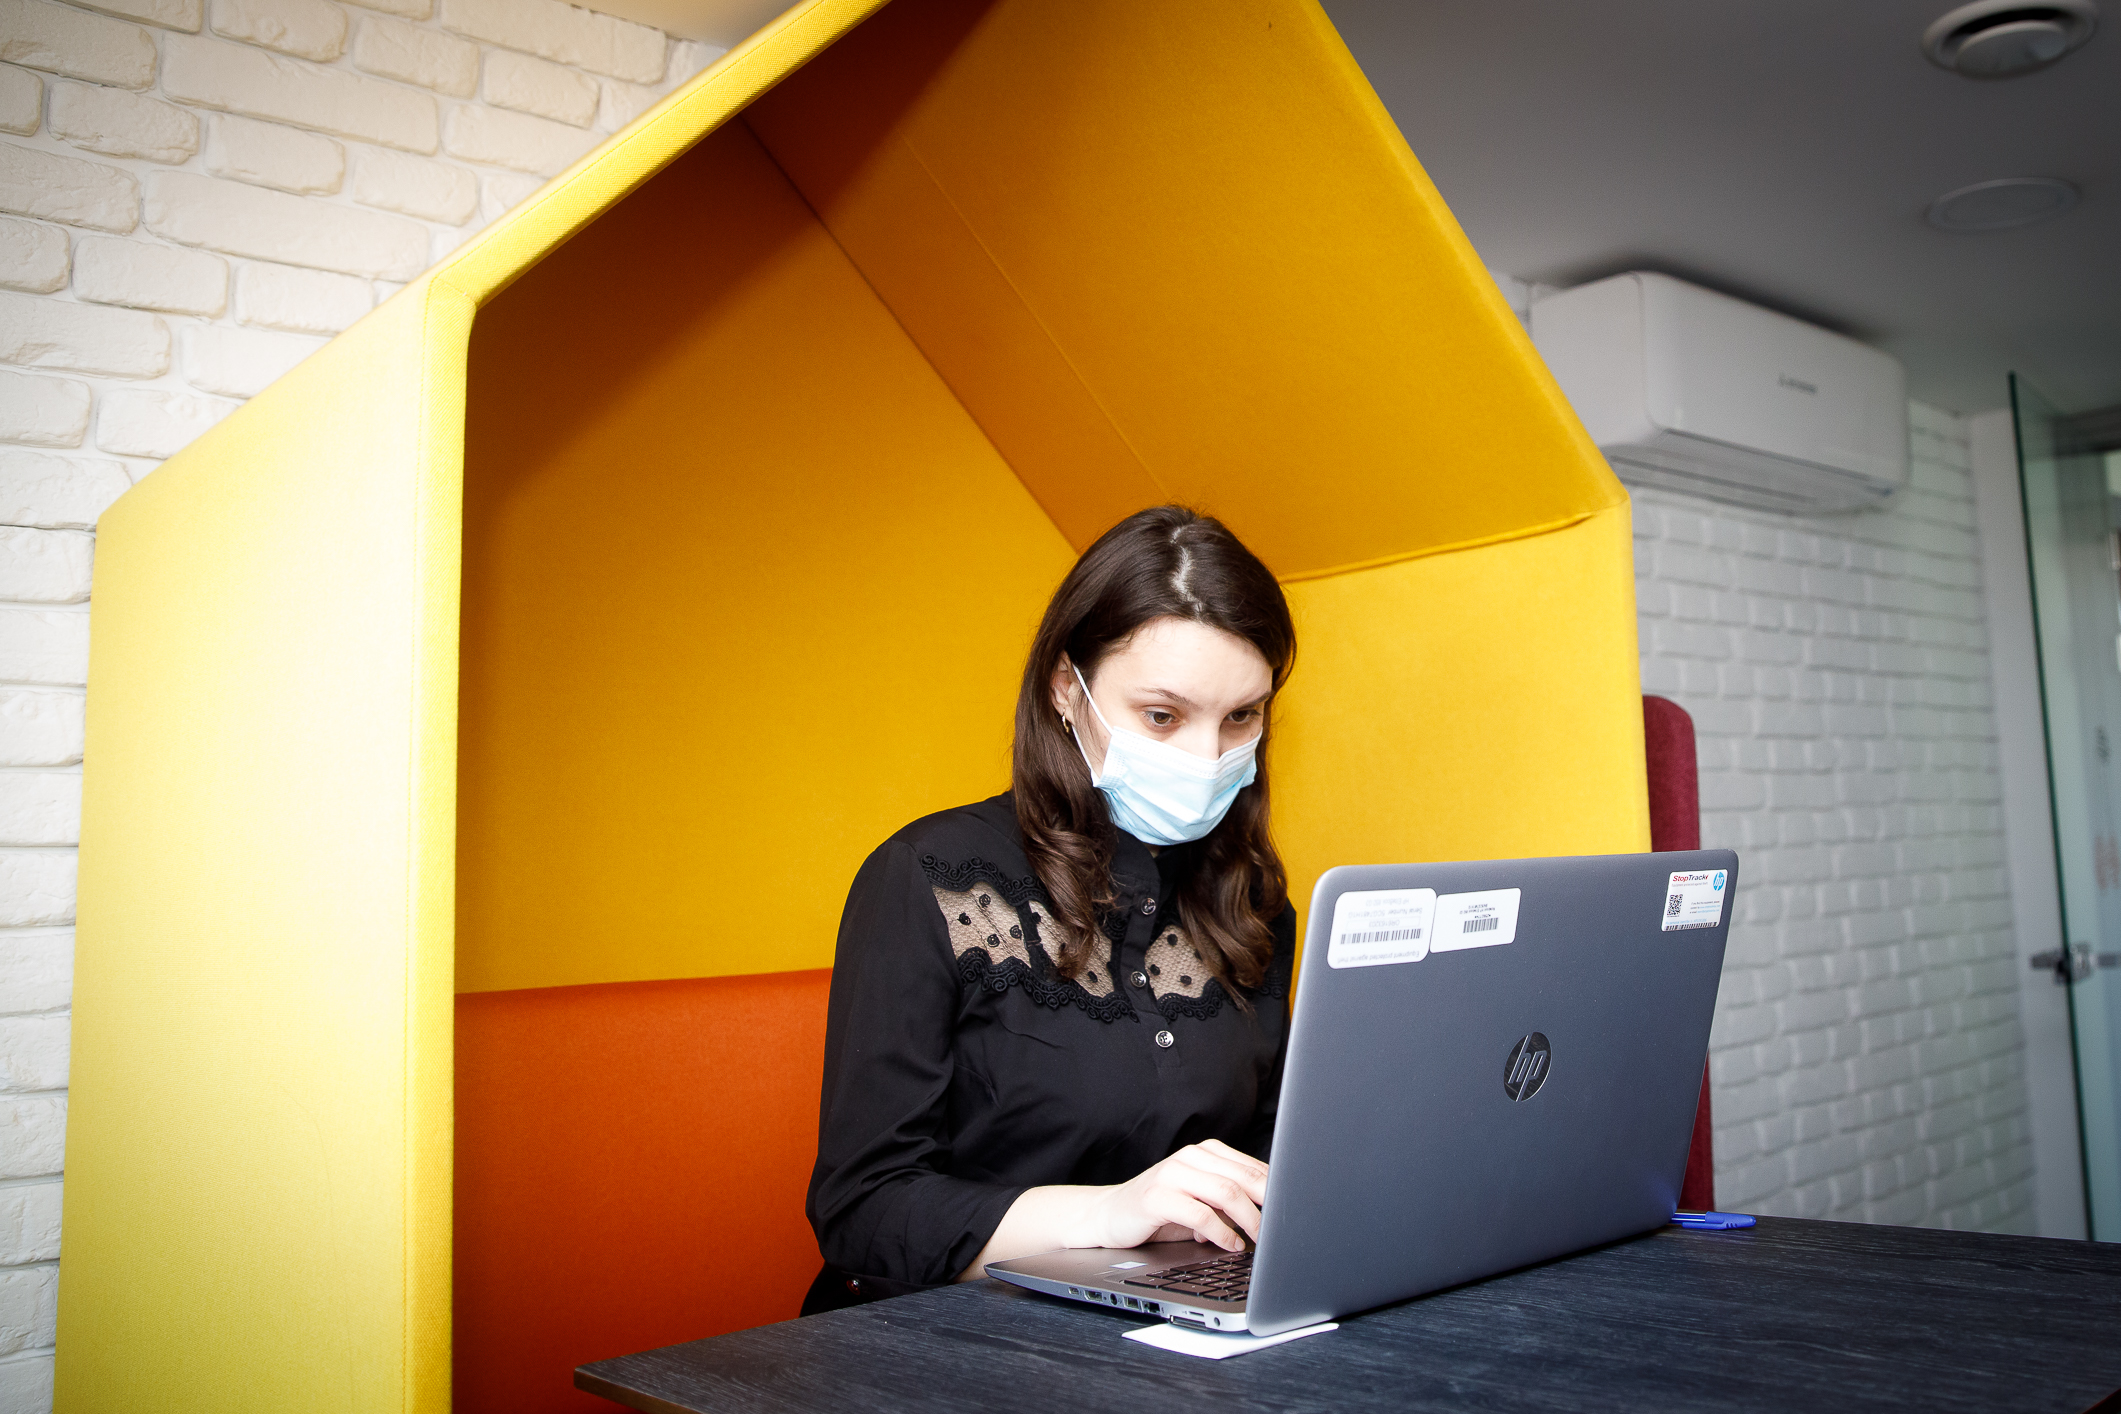 A woman in a black shirt wears a protective face mask and works at a laptop.